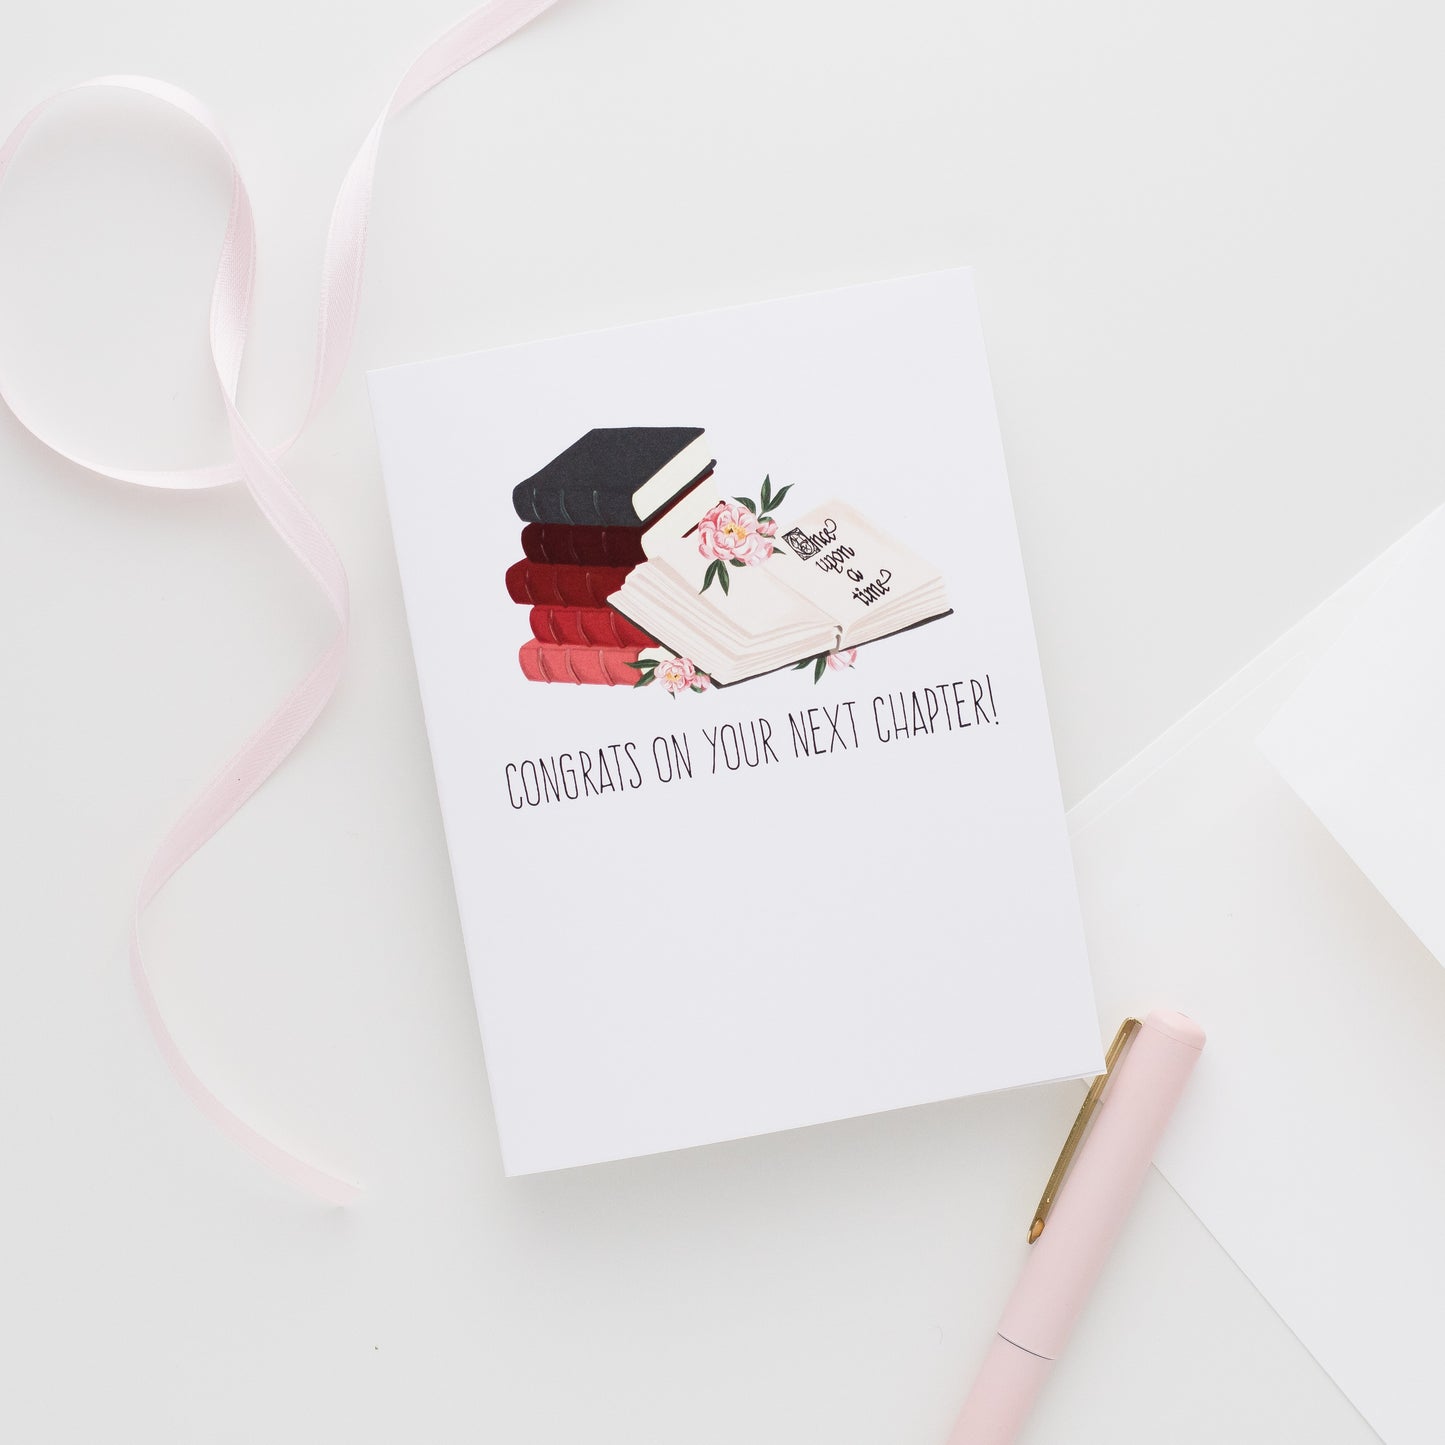 Congrats On Your Next Chapter! - Greeting Card